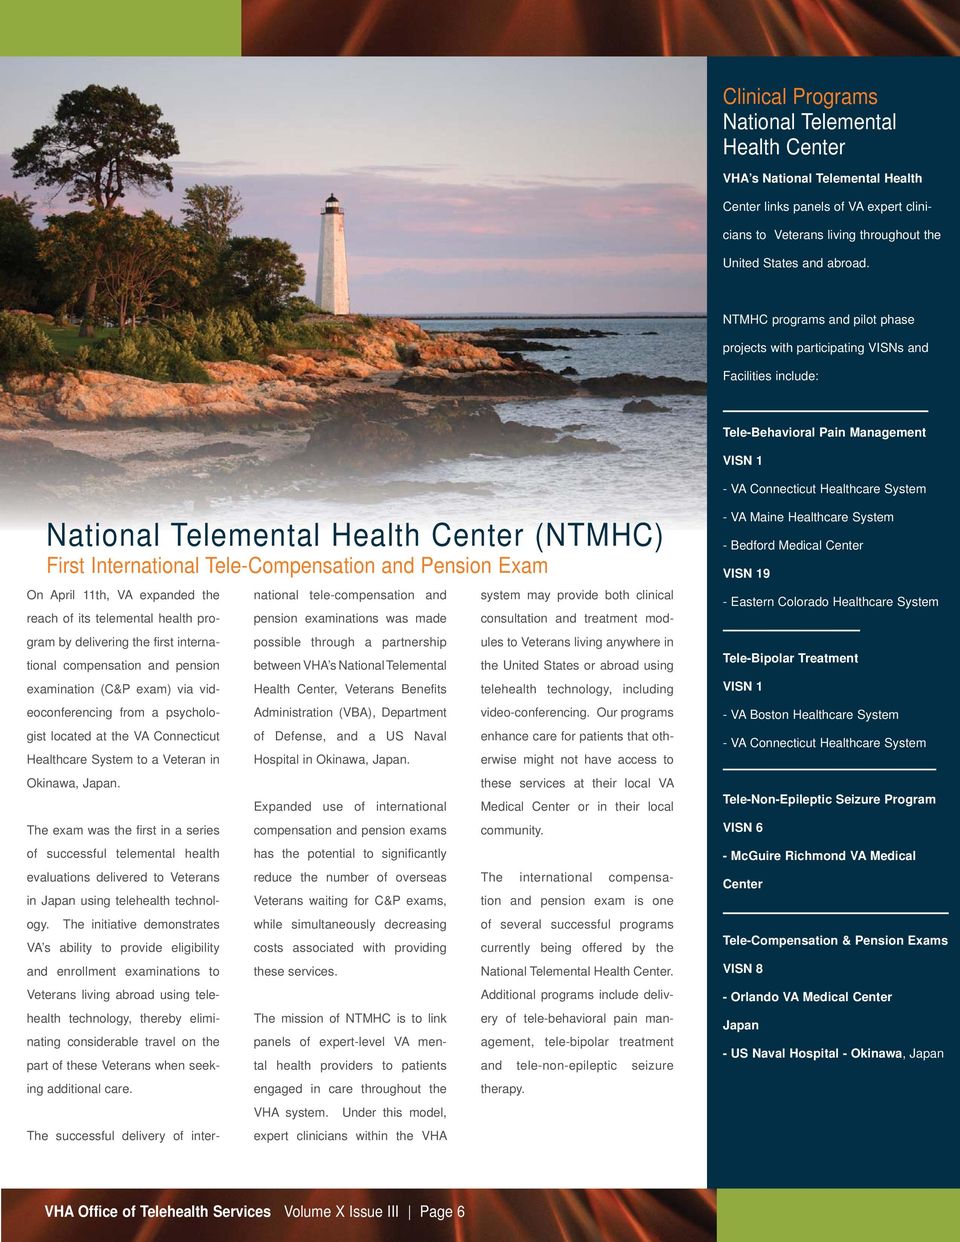 (NTMHC) First International Tele-Compensation and Pension Exam On April 11th, VA expanded the reach of its telemental health program by delivering the first international compensation and pension